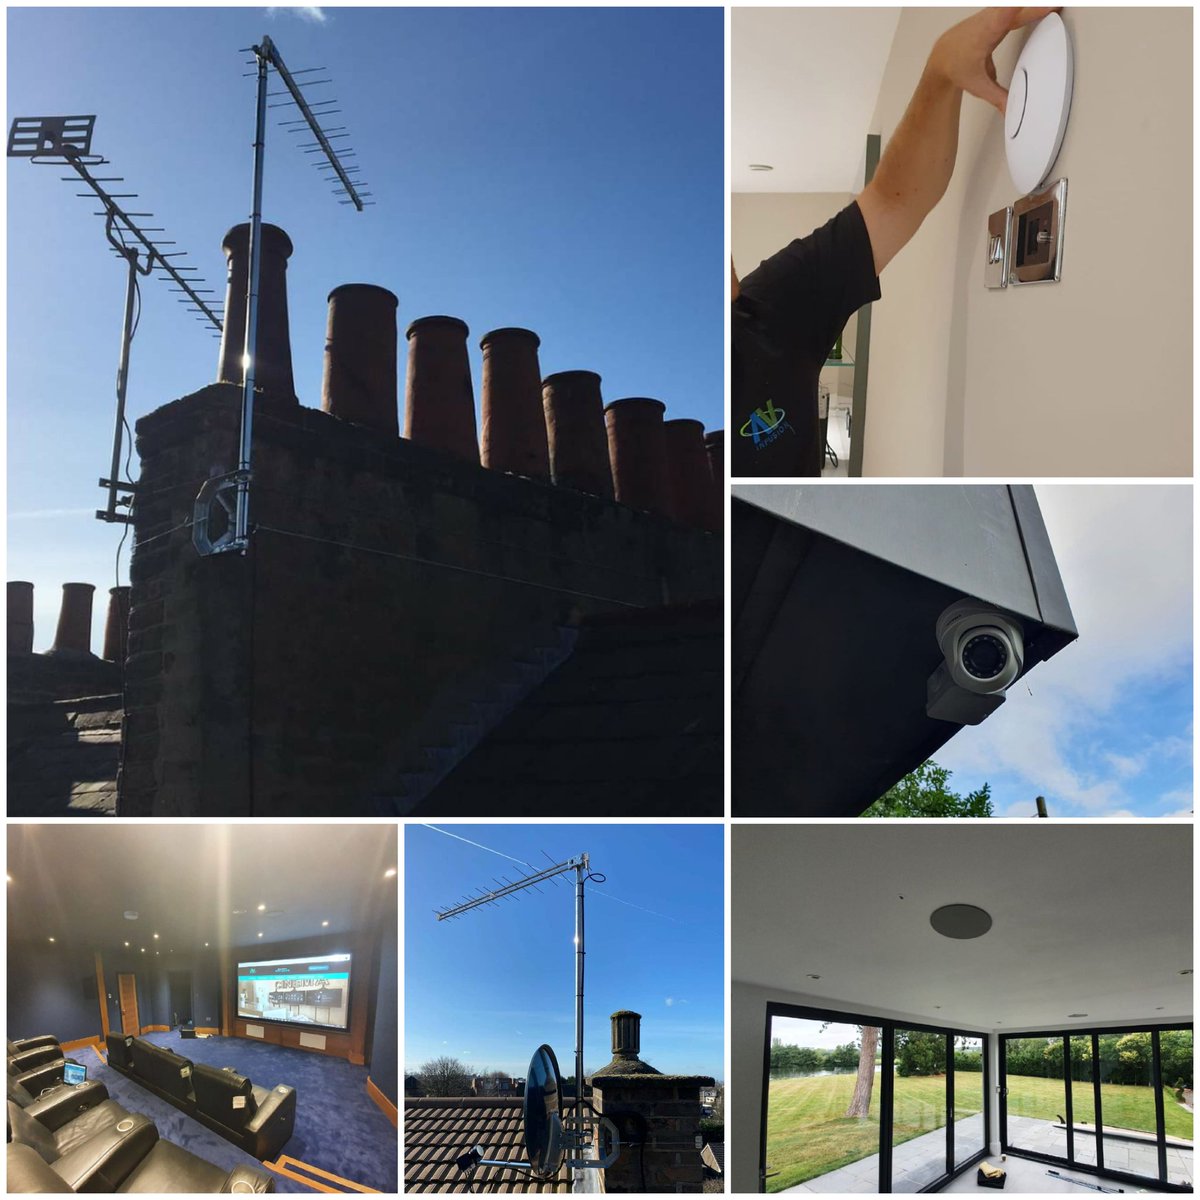 Get in touch with us today for a #free #noobligation #quote for; 

#Aerials & #Satellites
#CCTV
#WiFisolutions 
#Homecinema
#Smarthomes & #Smartintercoms